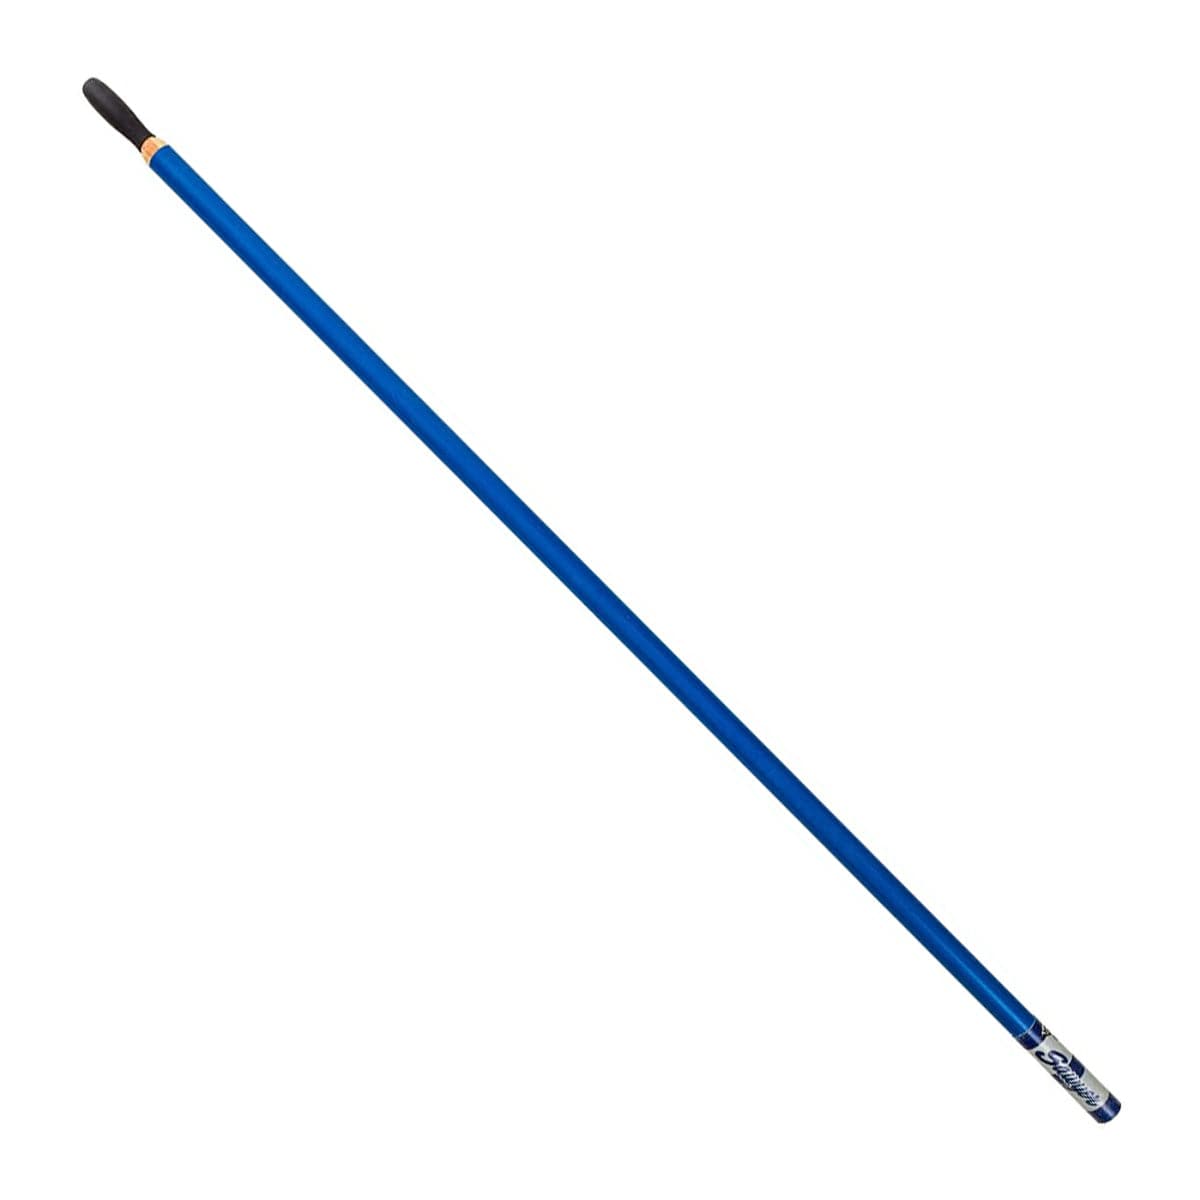 Featuring the Polecat Oar - Bare Shaft oar manufactured by Sawyer shown here from a second angle.